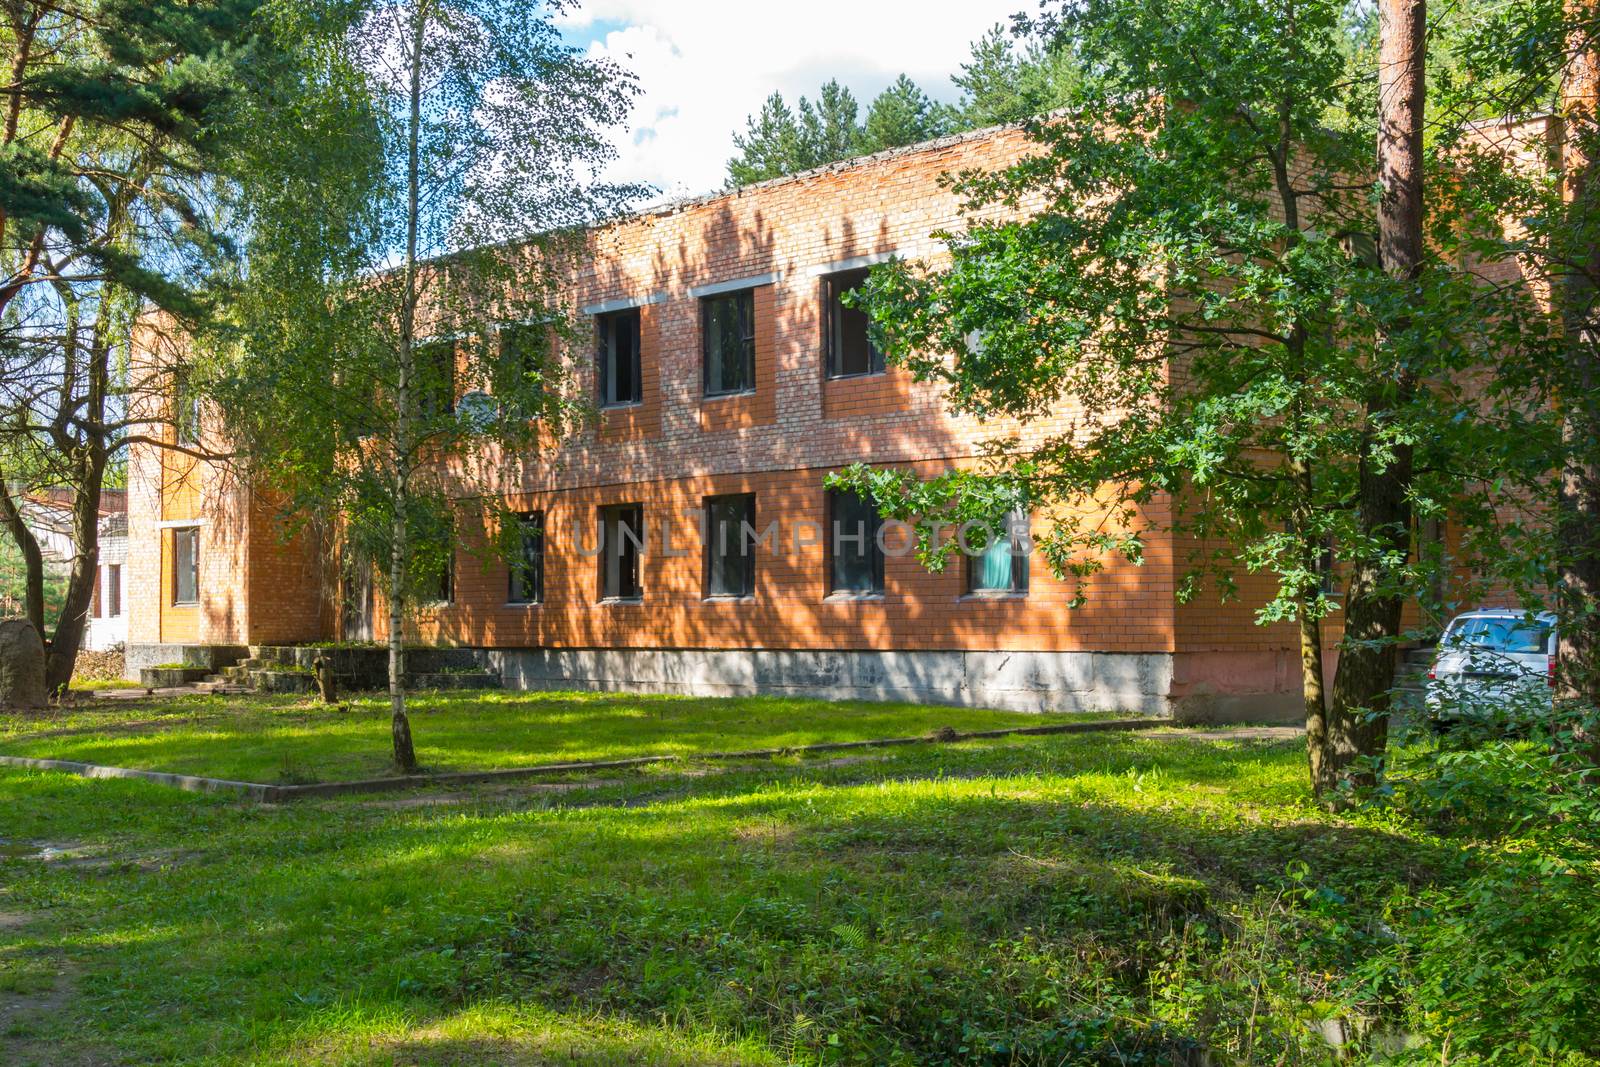 The large abandoned brick building is surrounded by tall, slender trees by Adamchuk